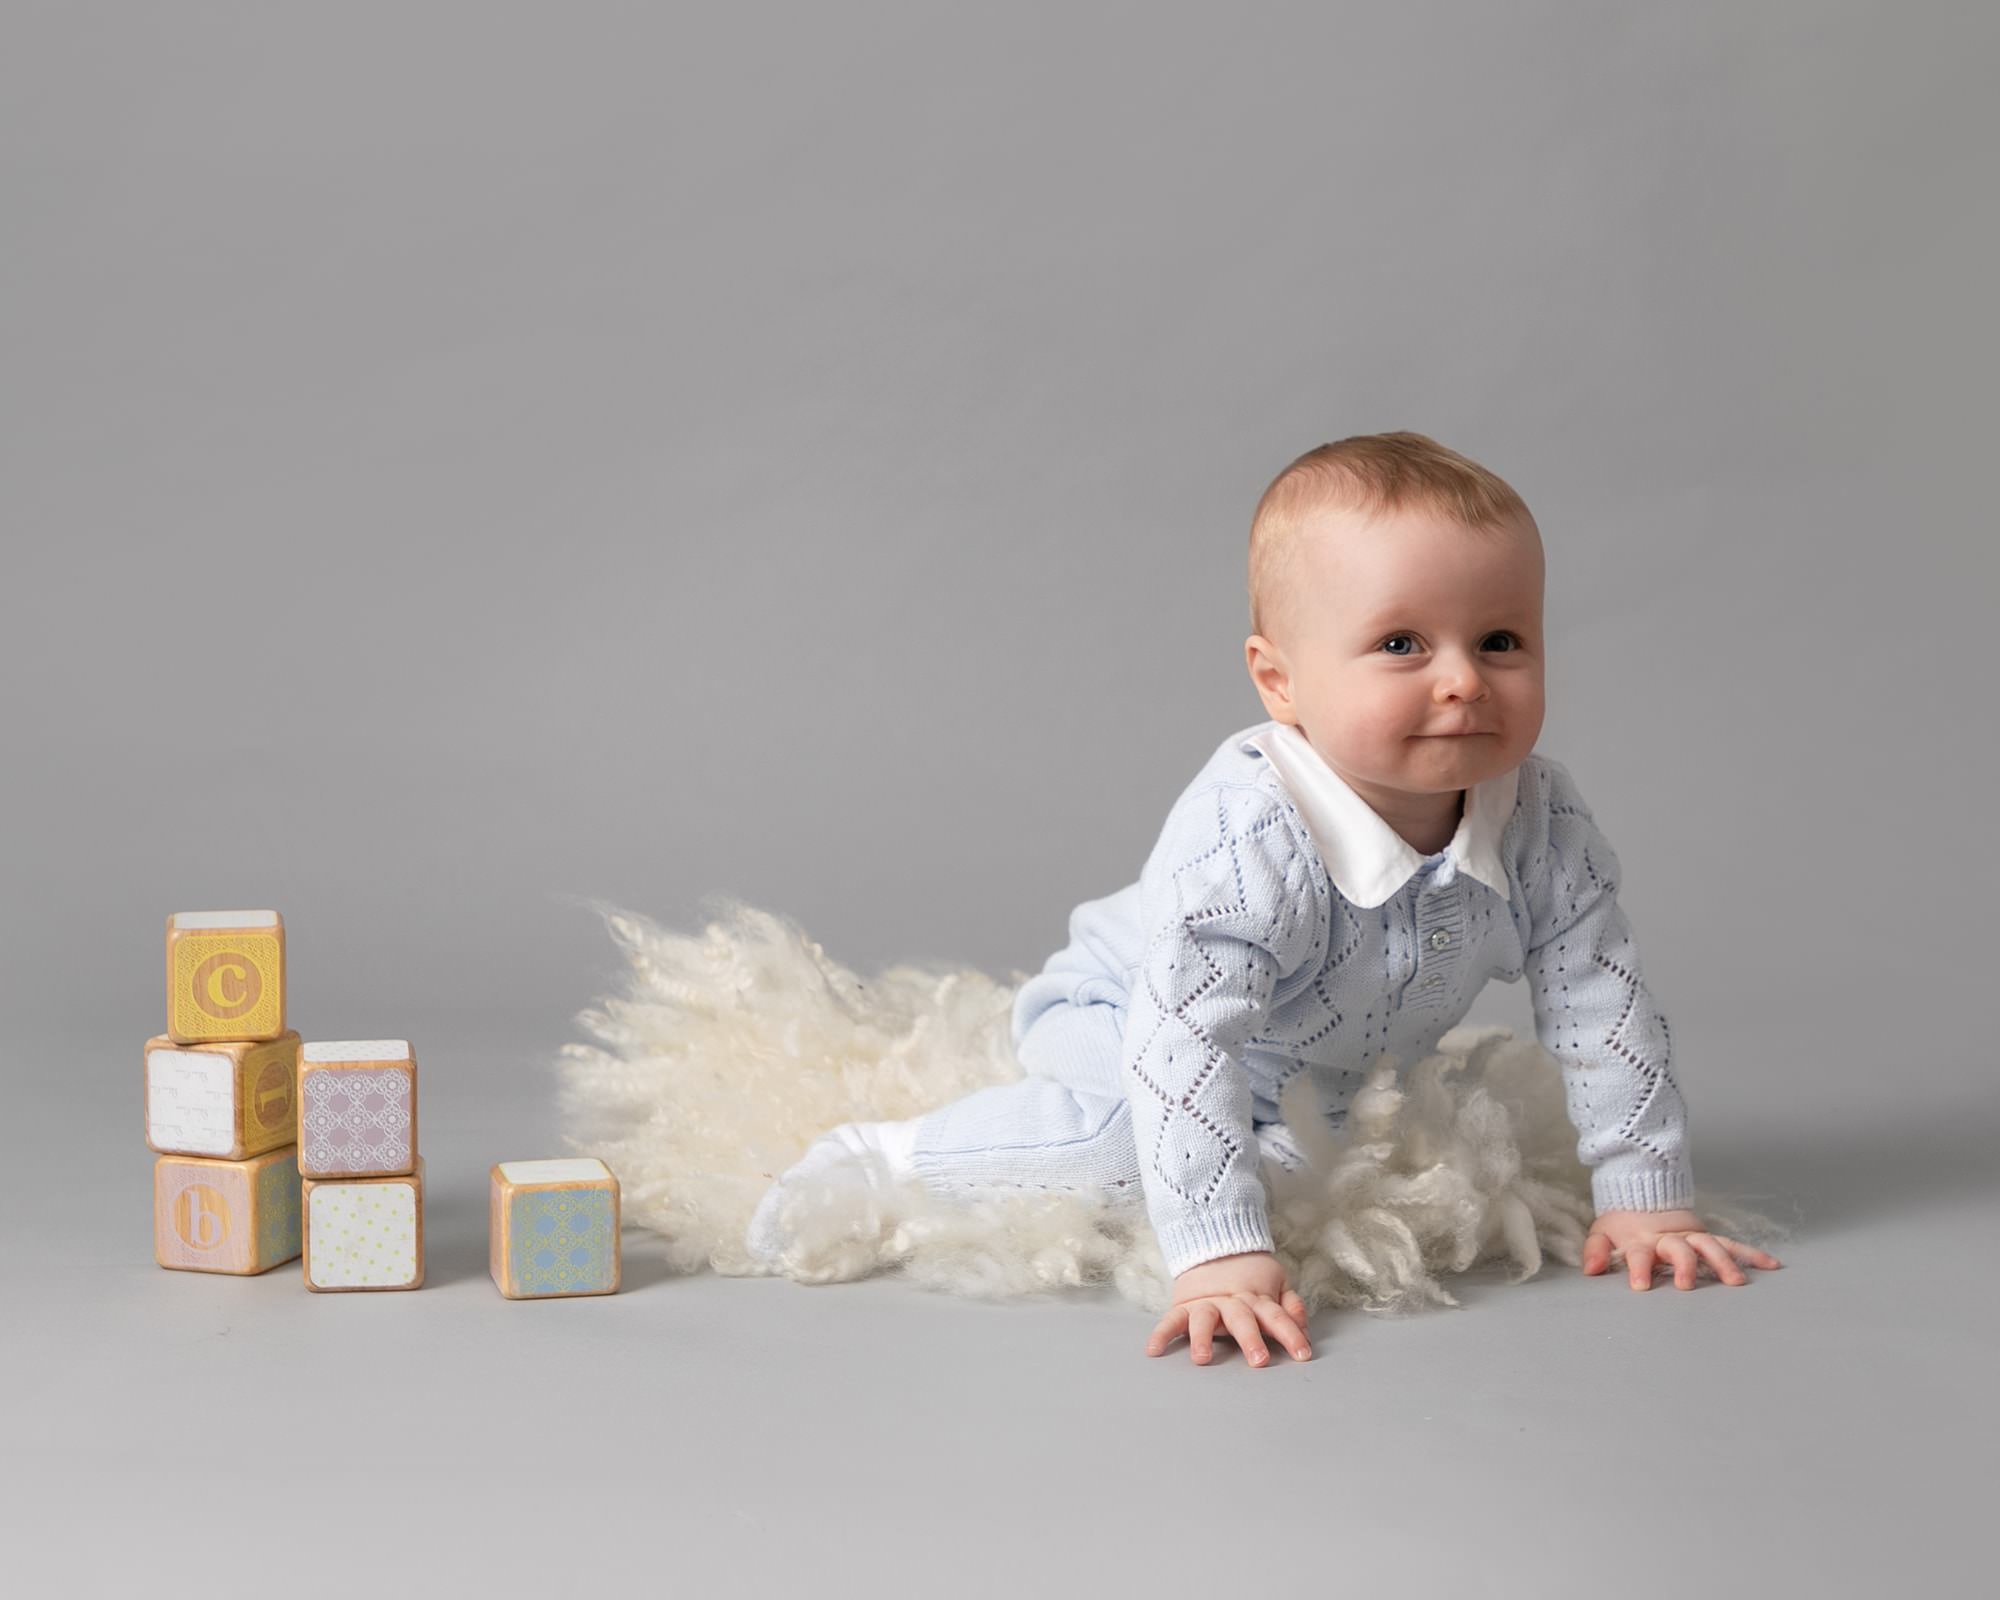 Baby boy on grey backdrop, sat in a cream bowl with fluff. Blue romper